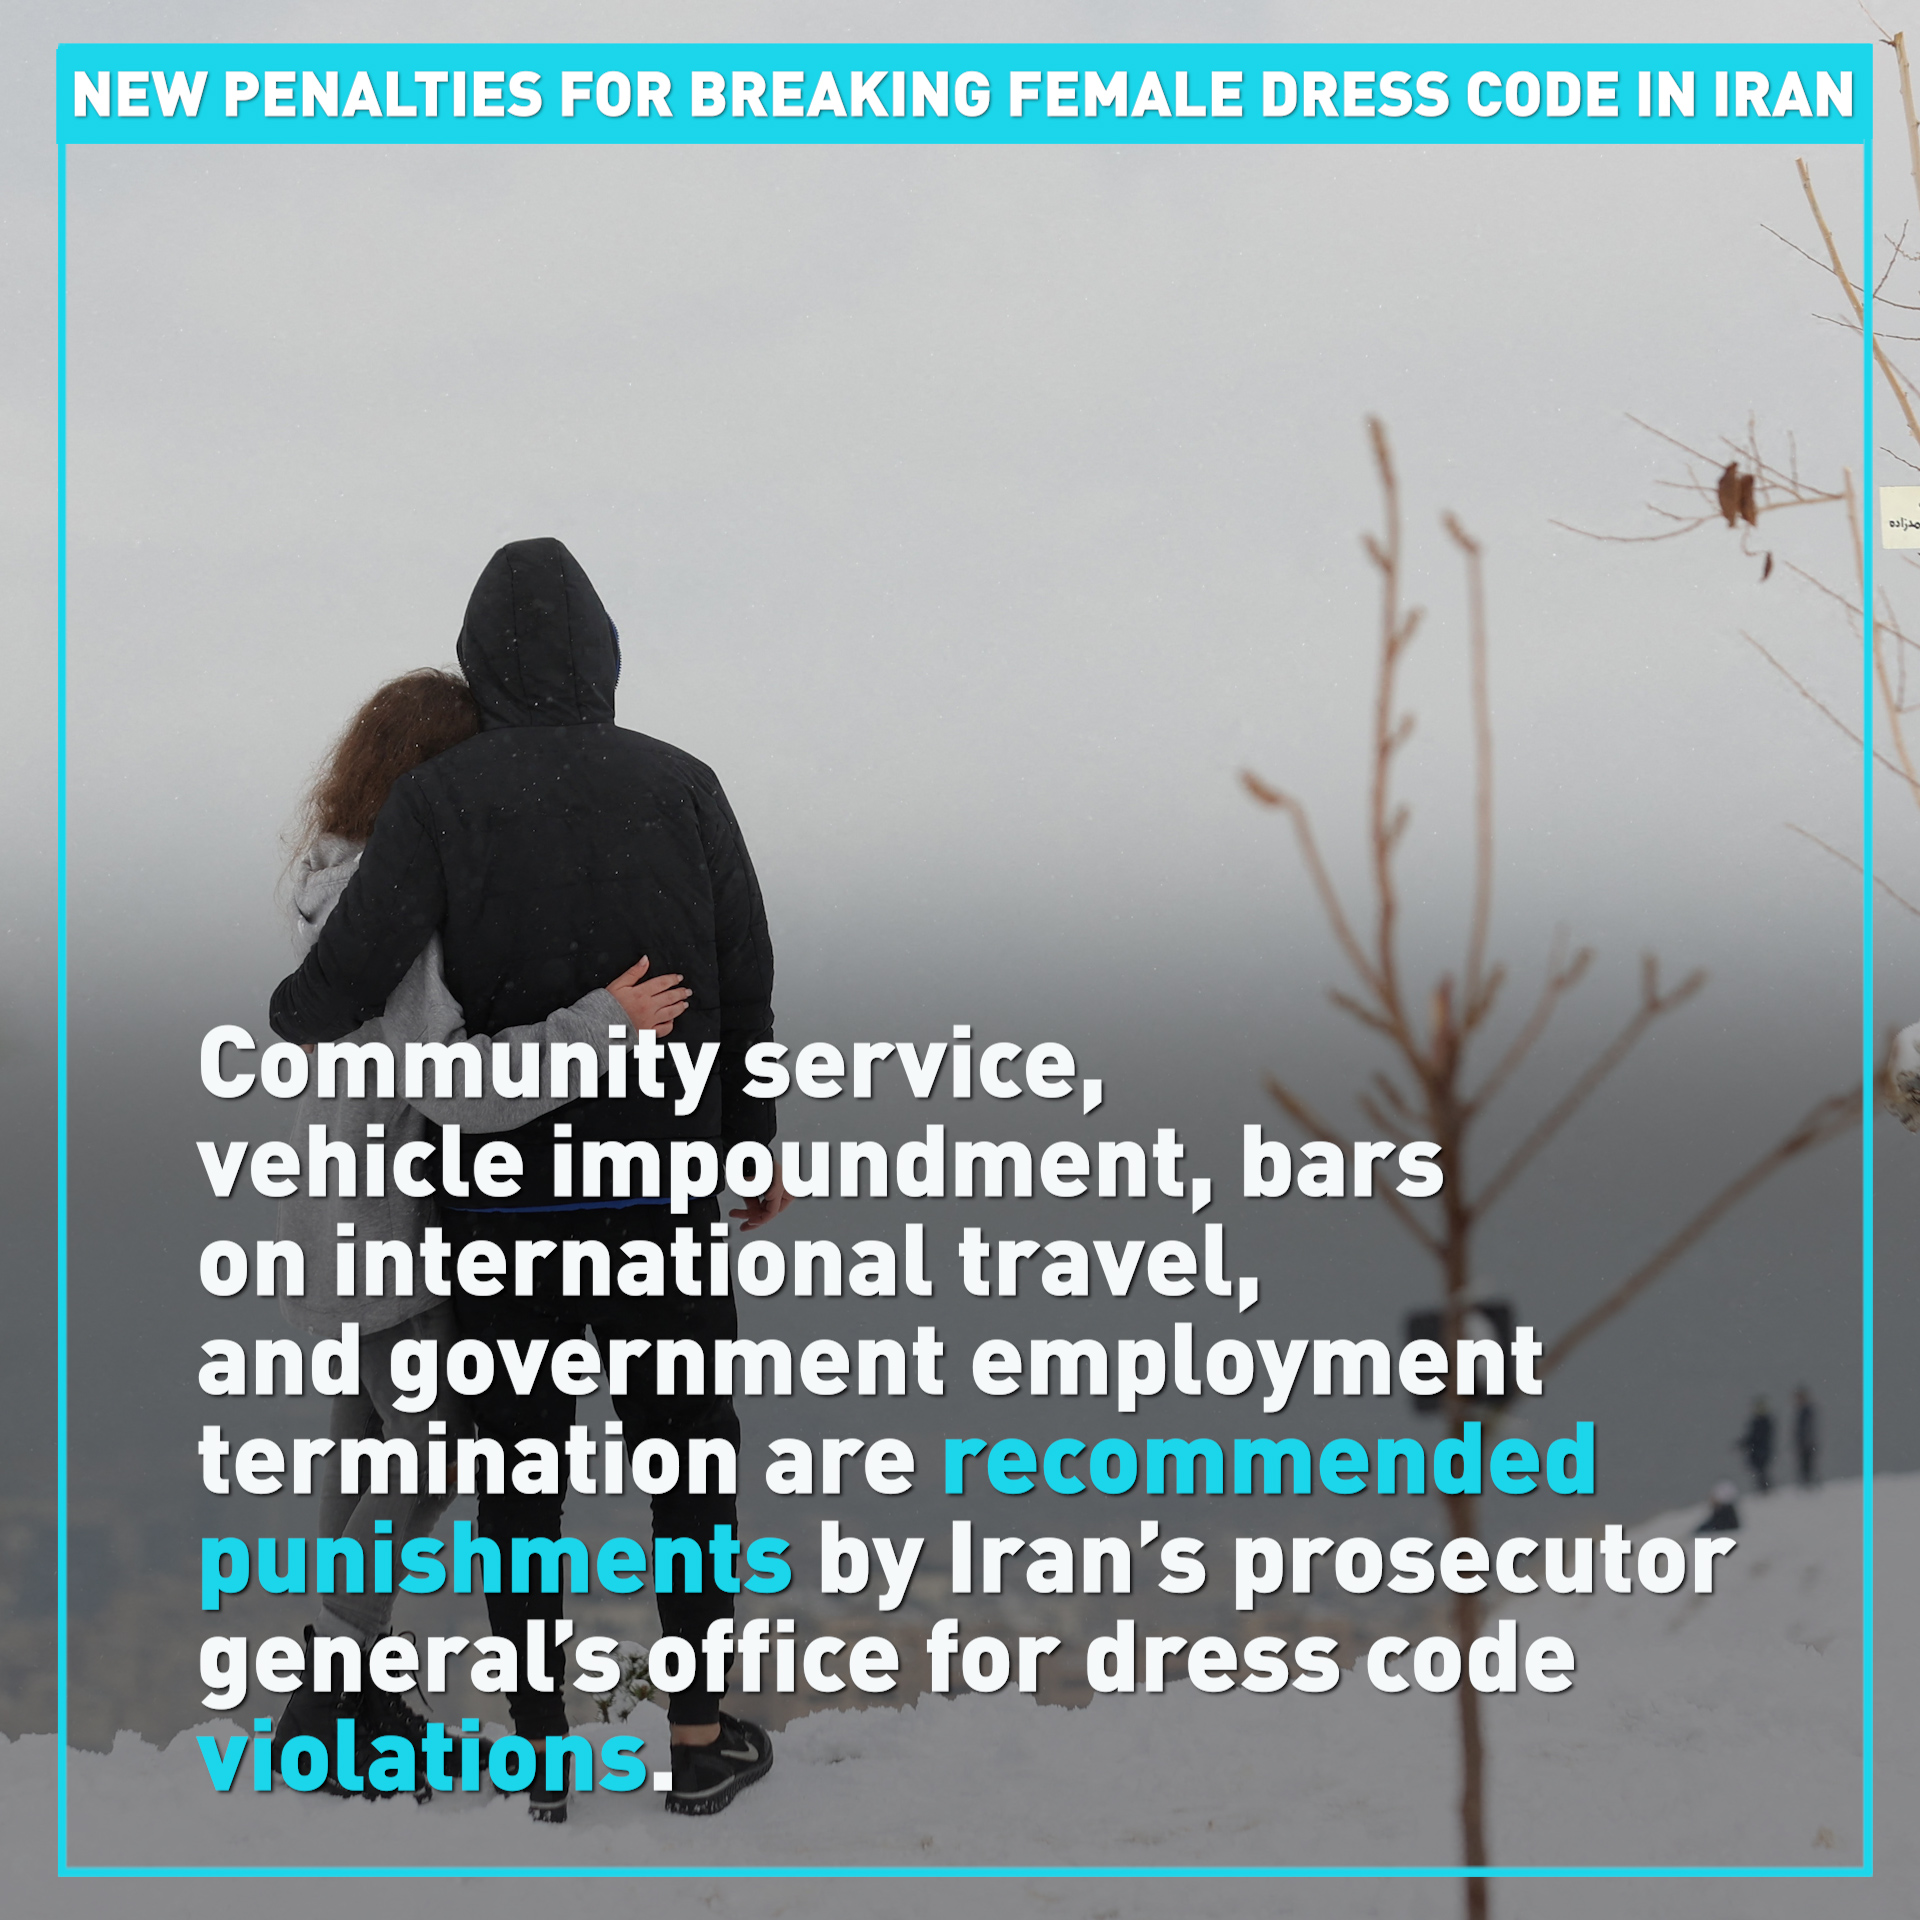 New penalties rather than arrest for breaking dress code in Iran